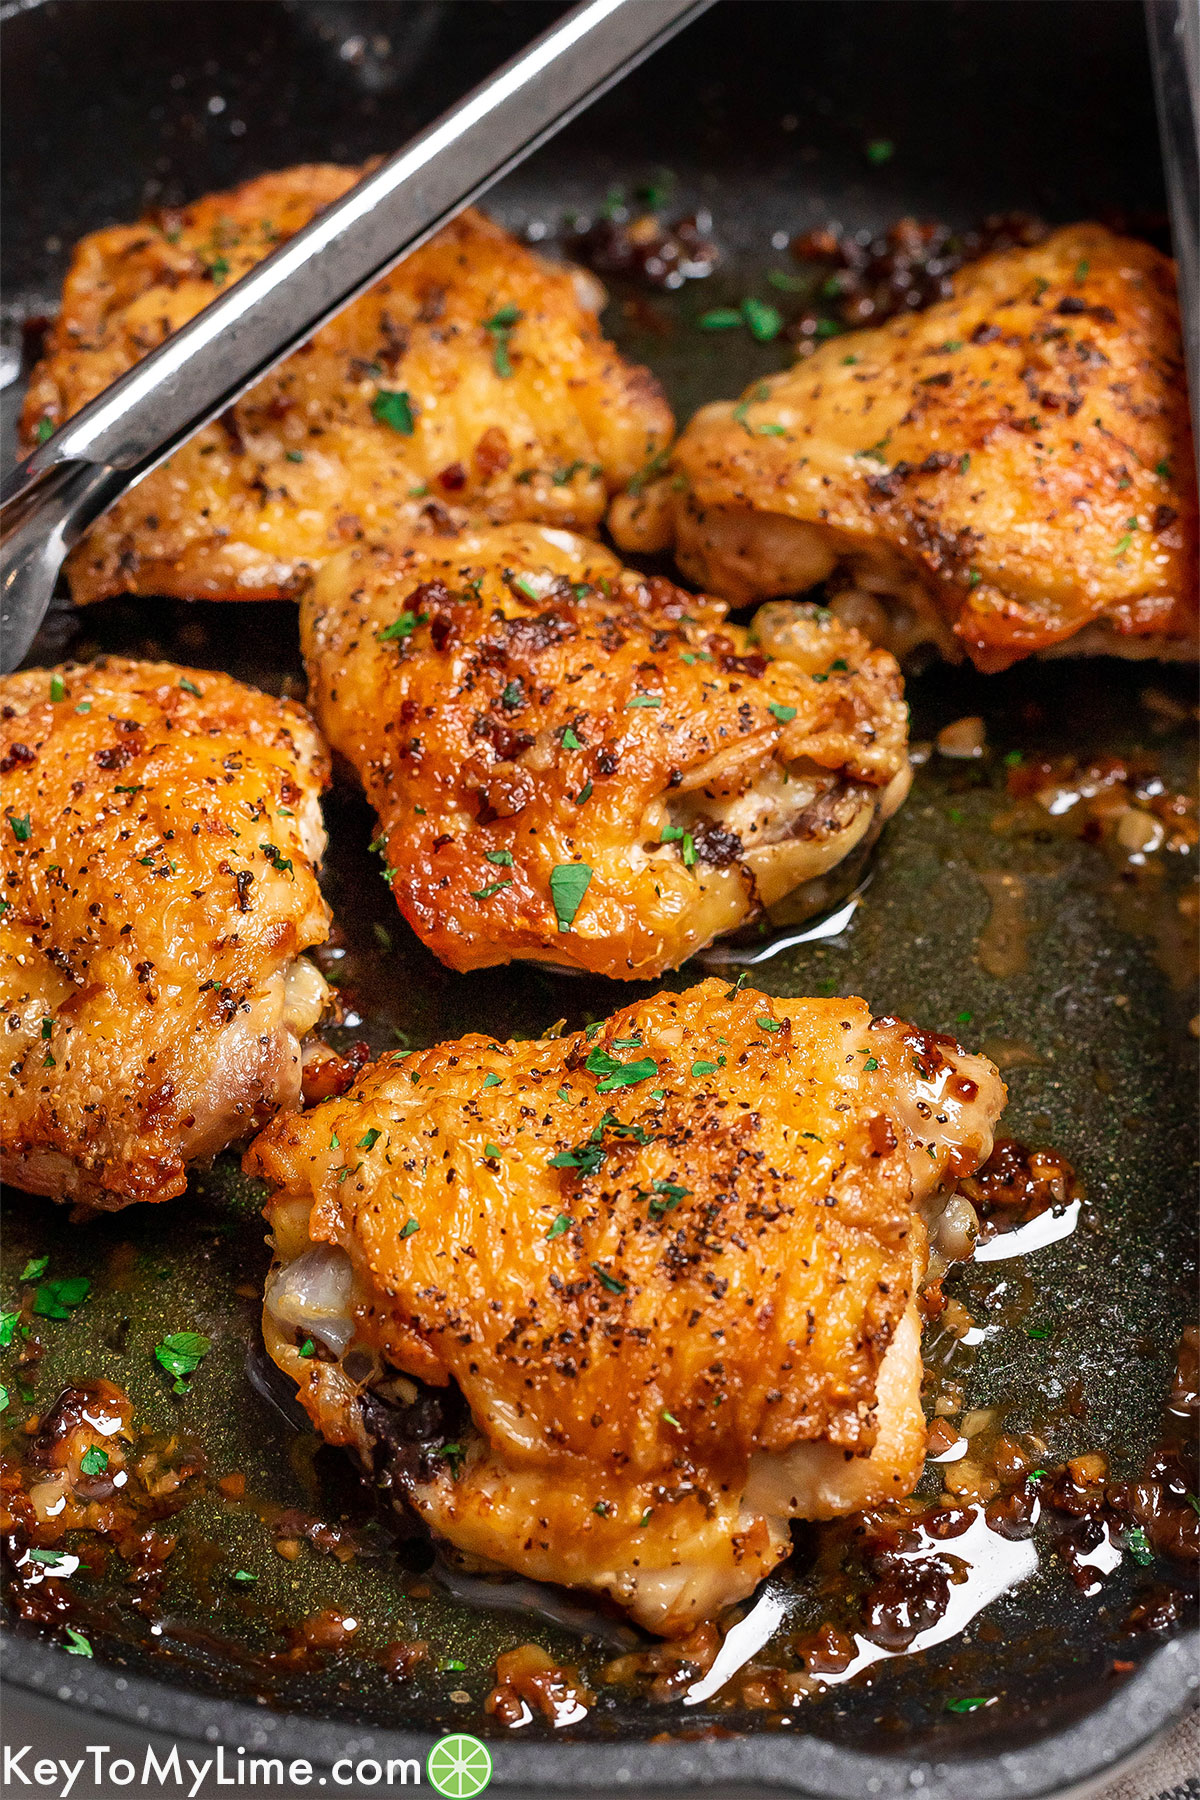 A close up image of crispy chicken thighs with fresh parsley garnished in a skillet.